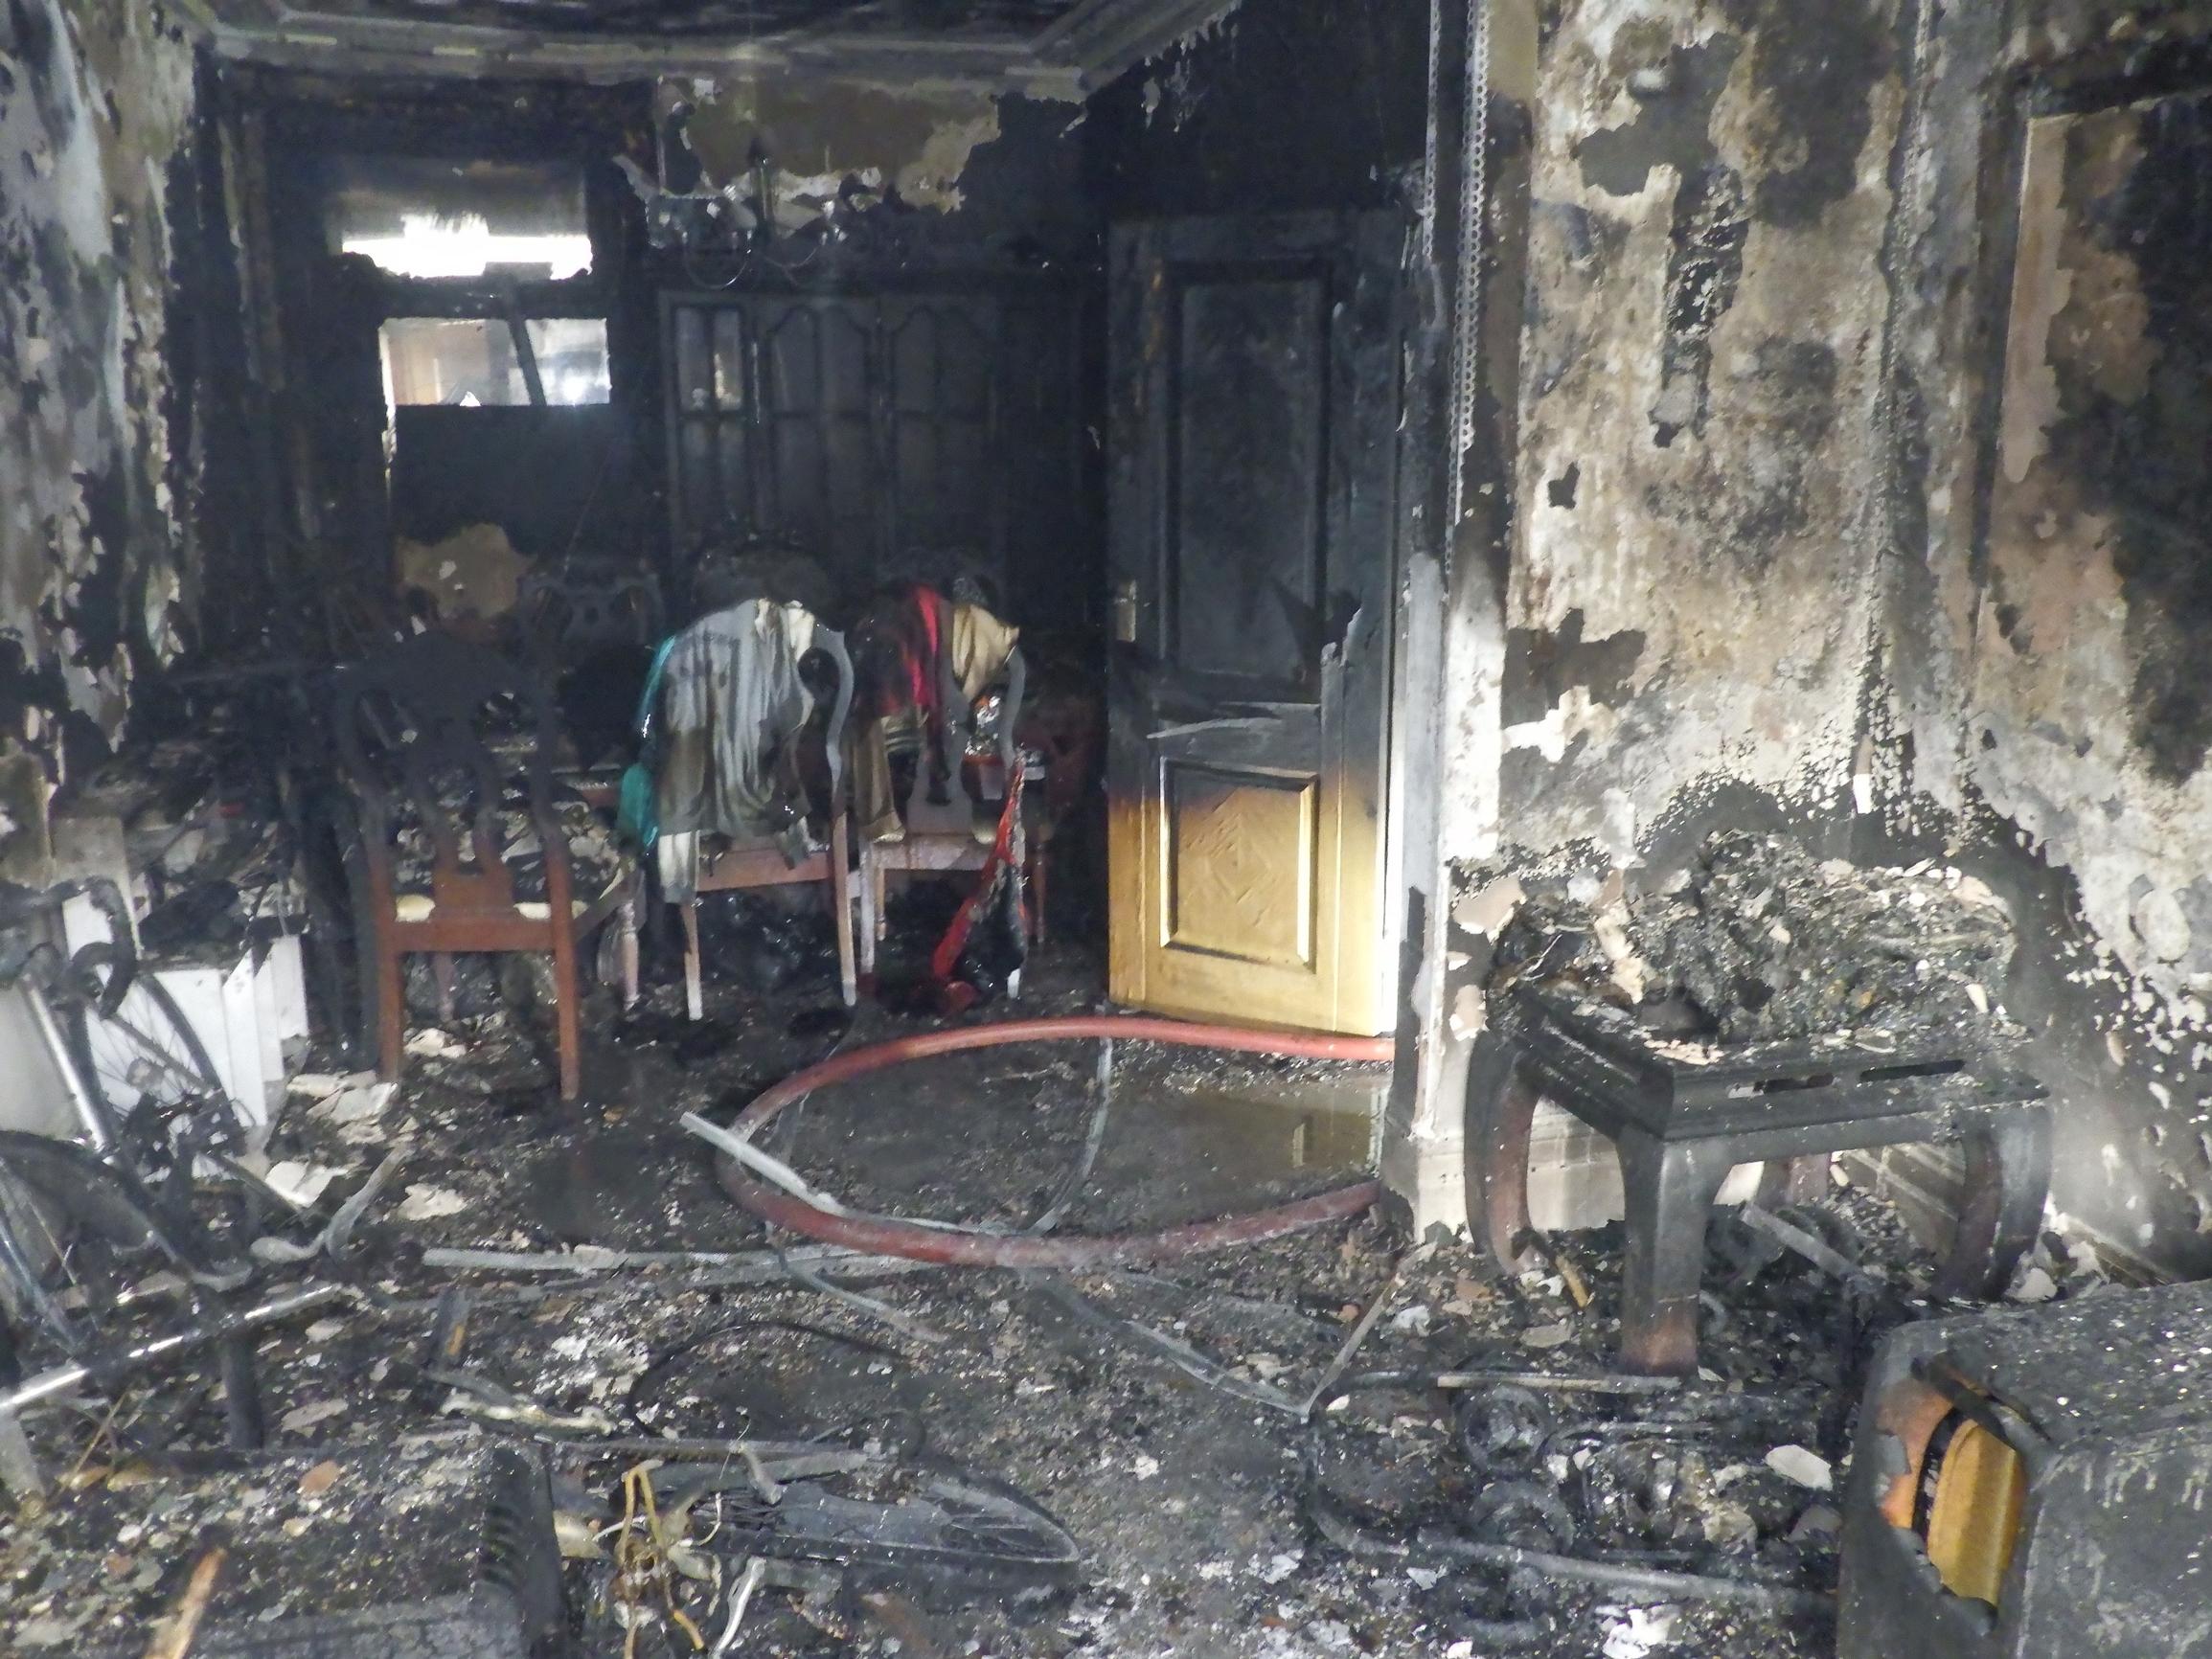 The property in Walthamstow, north-east London, damaged by an e-bike fire on Sunday